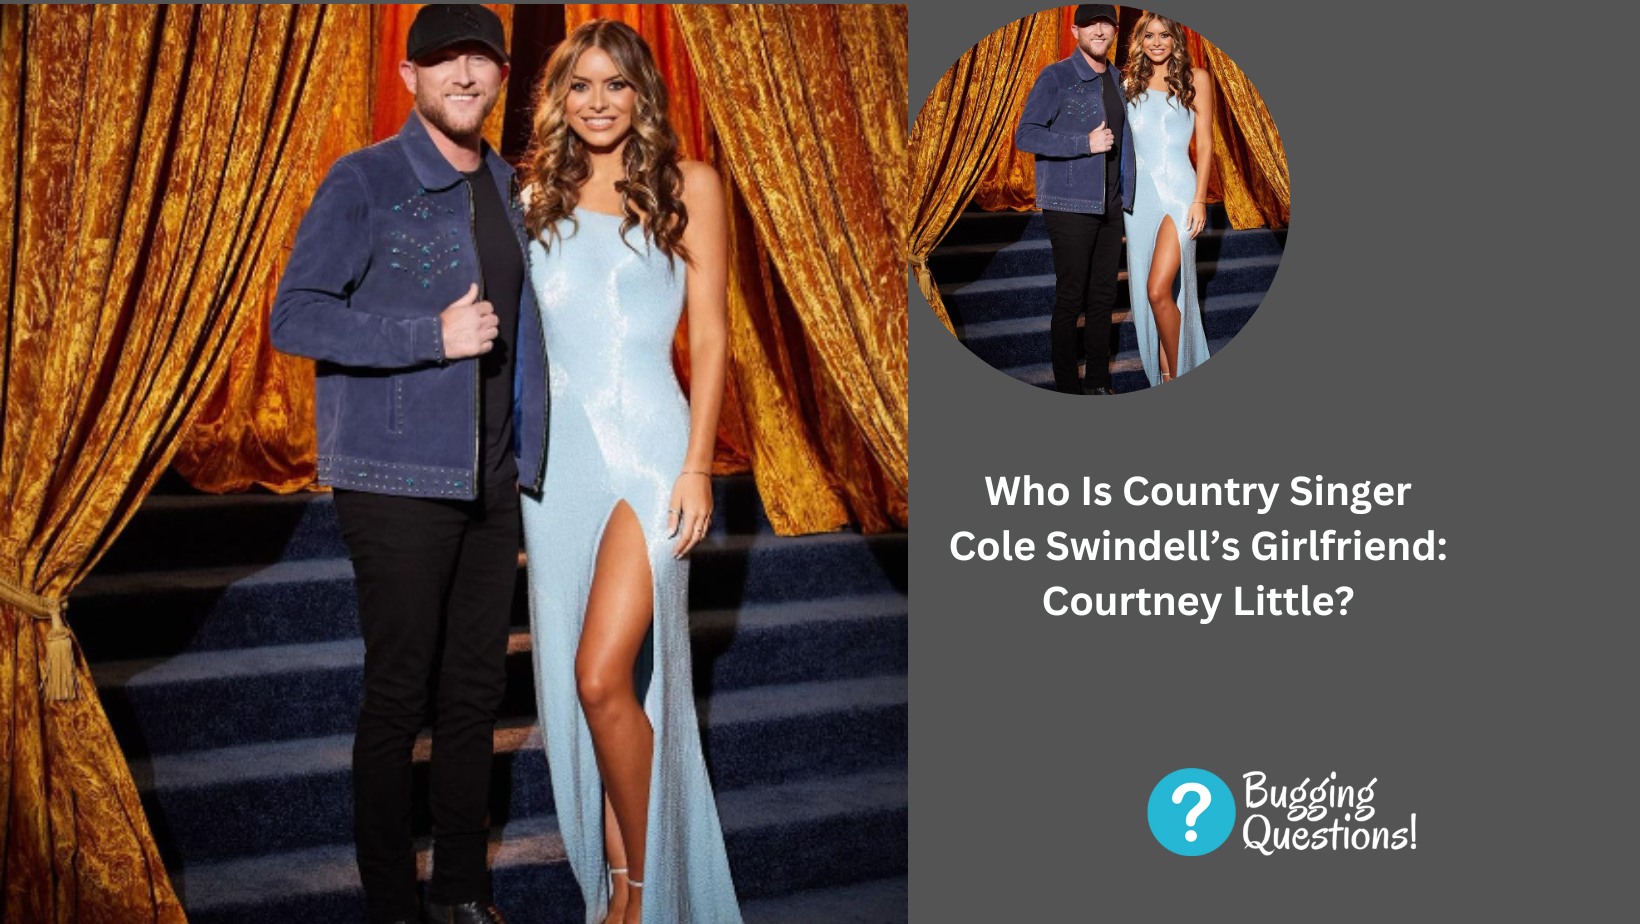 Who Is Country Singer Cole Swindell’s Girlfriend: Courtney Little?